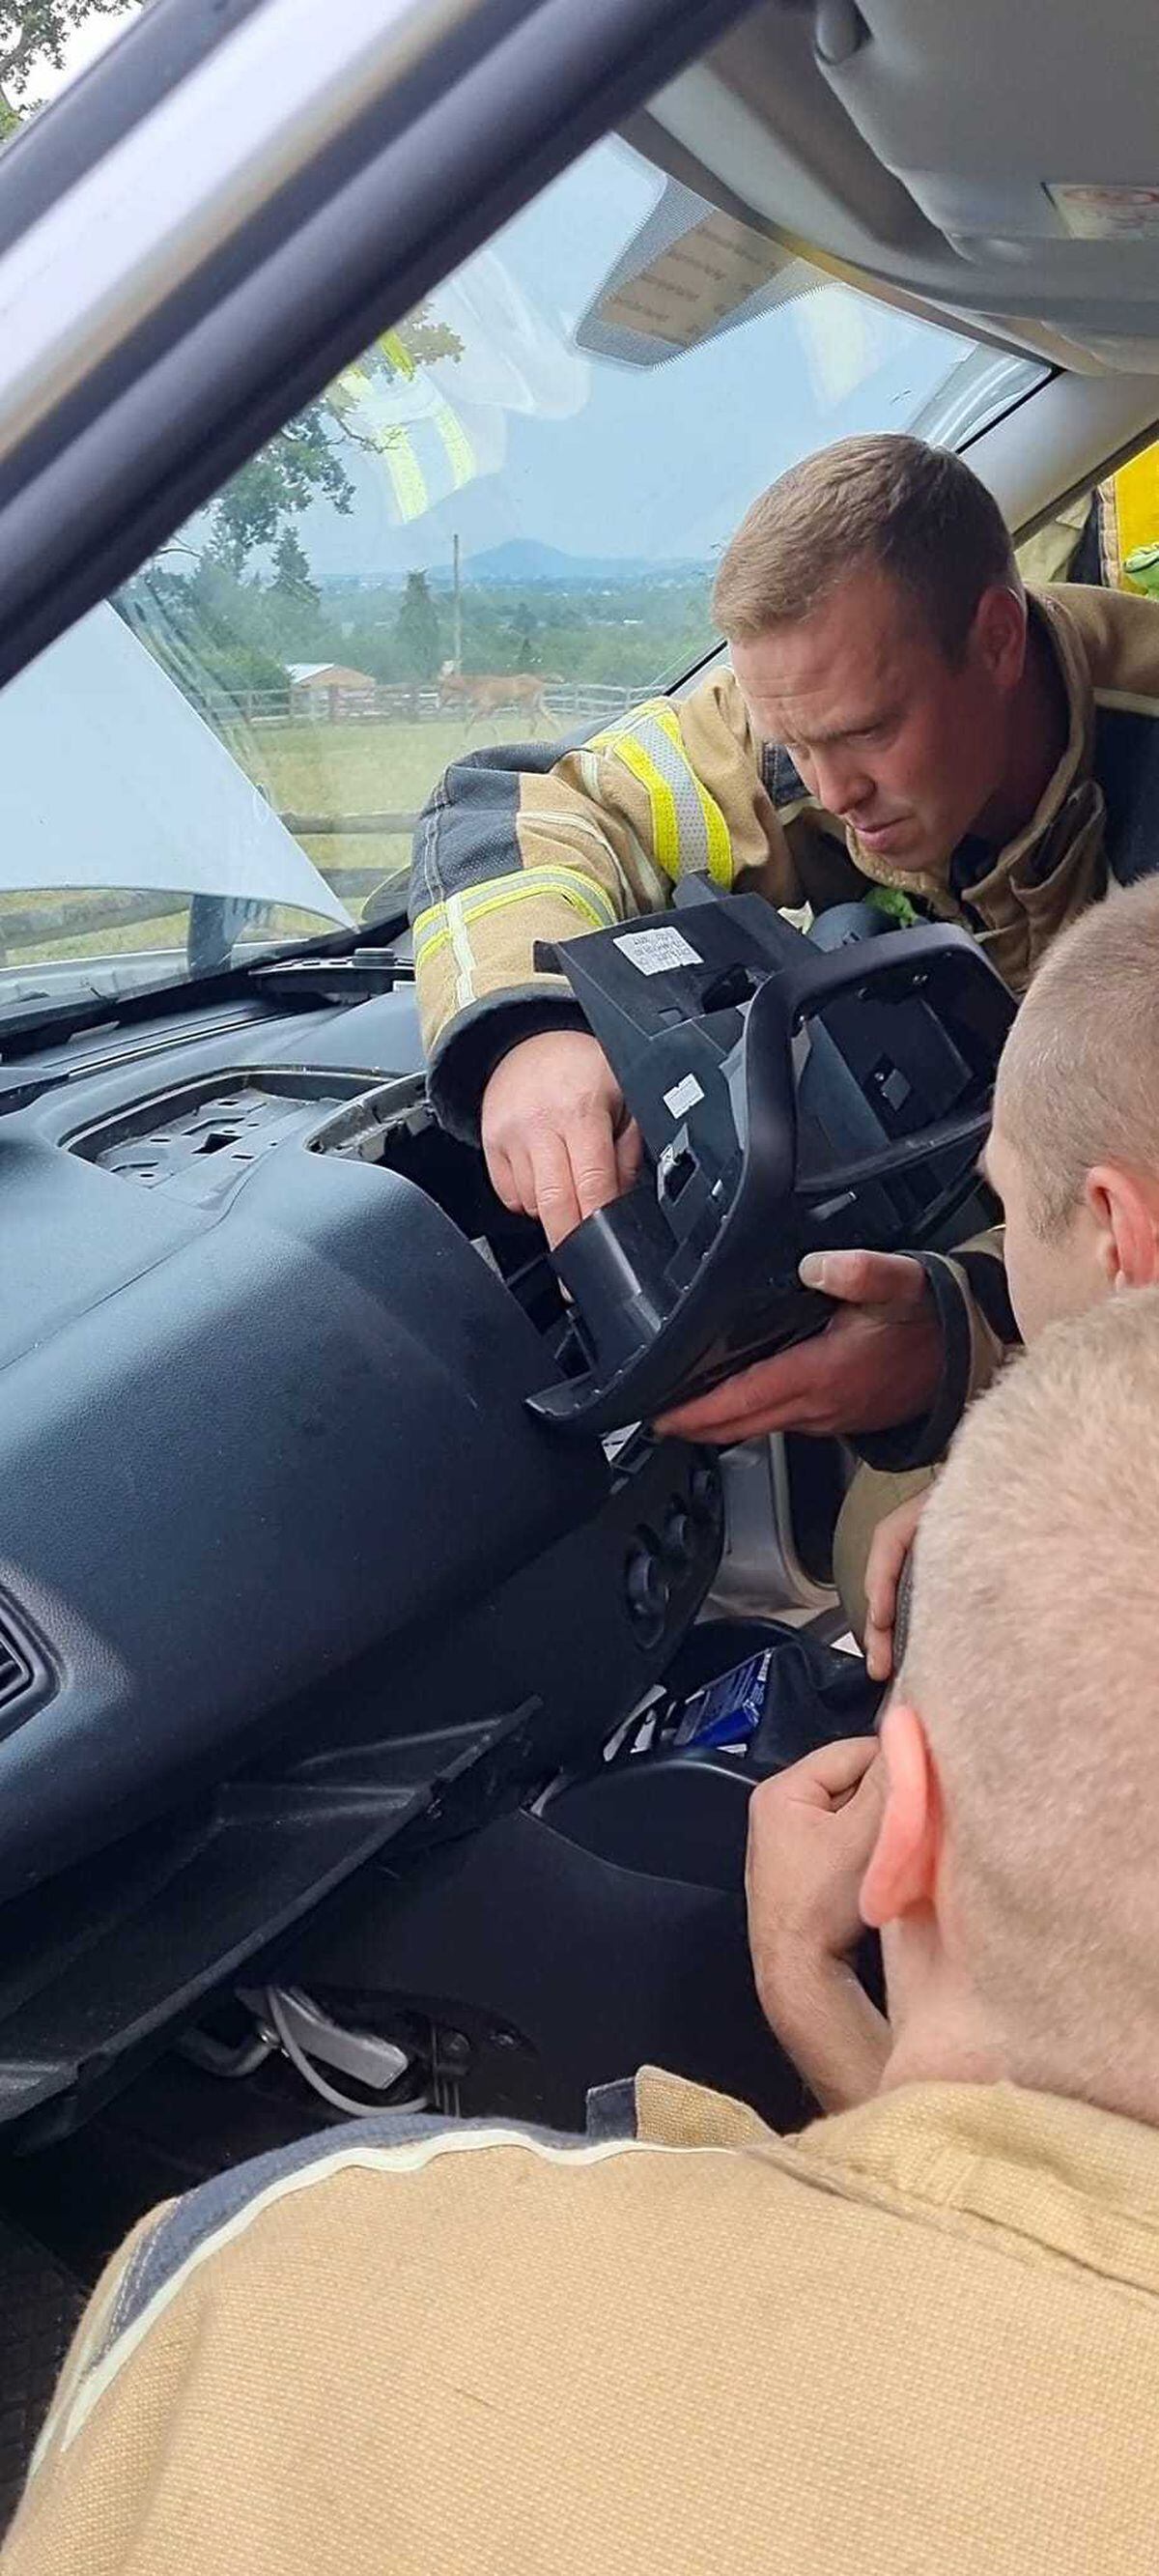 The firefighters get into the dashboard